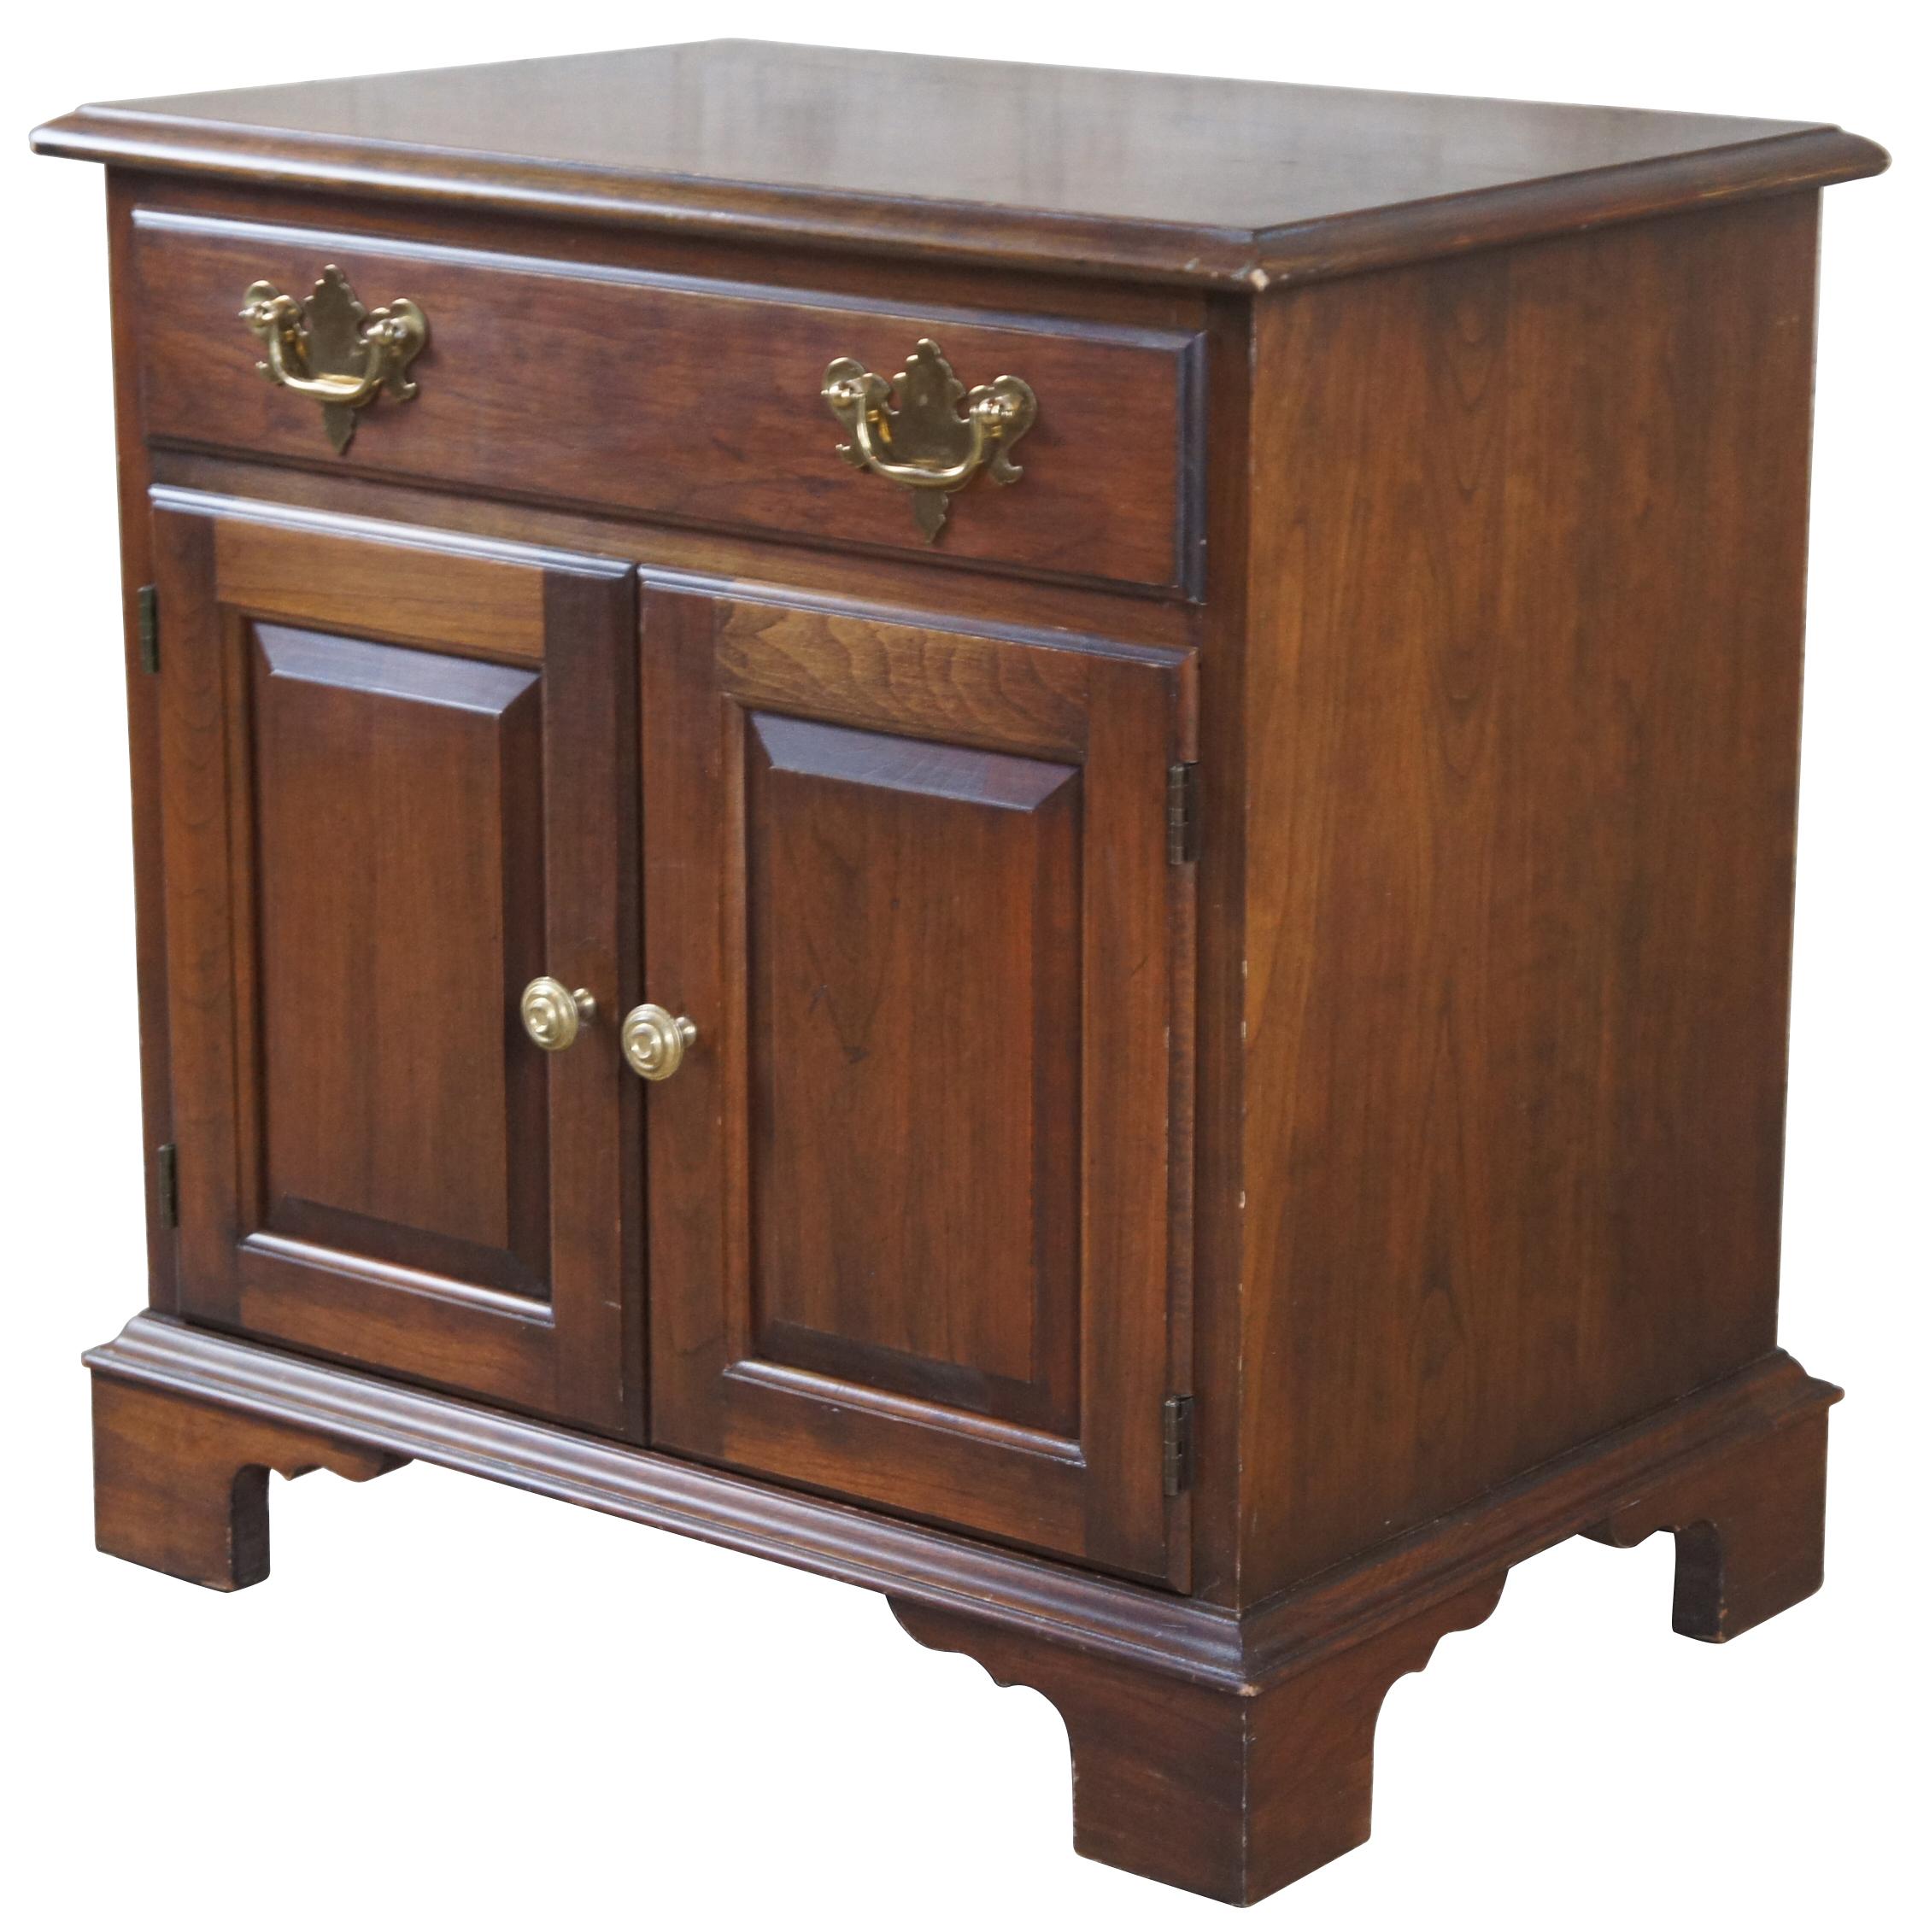 Vintage Pennsylvania House nightstand or cabinet. Made of cherry featuring one upper drawer and a cabinet with two doors and brass federal style hardware. Measures: 23”.
   